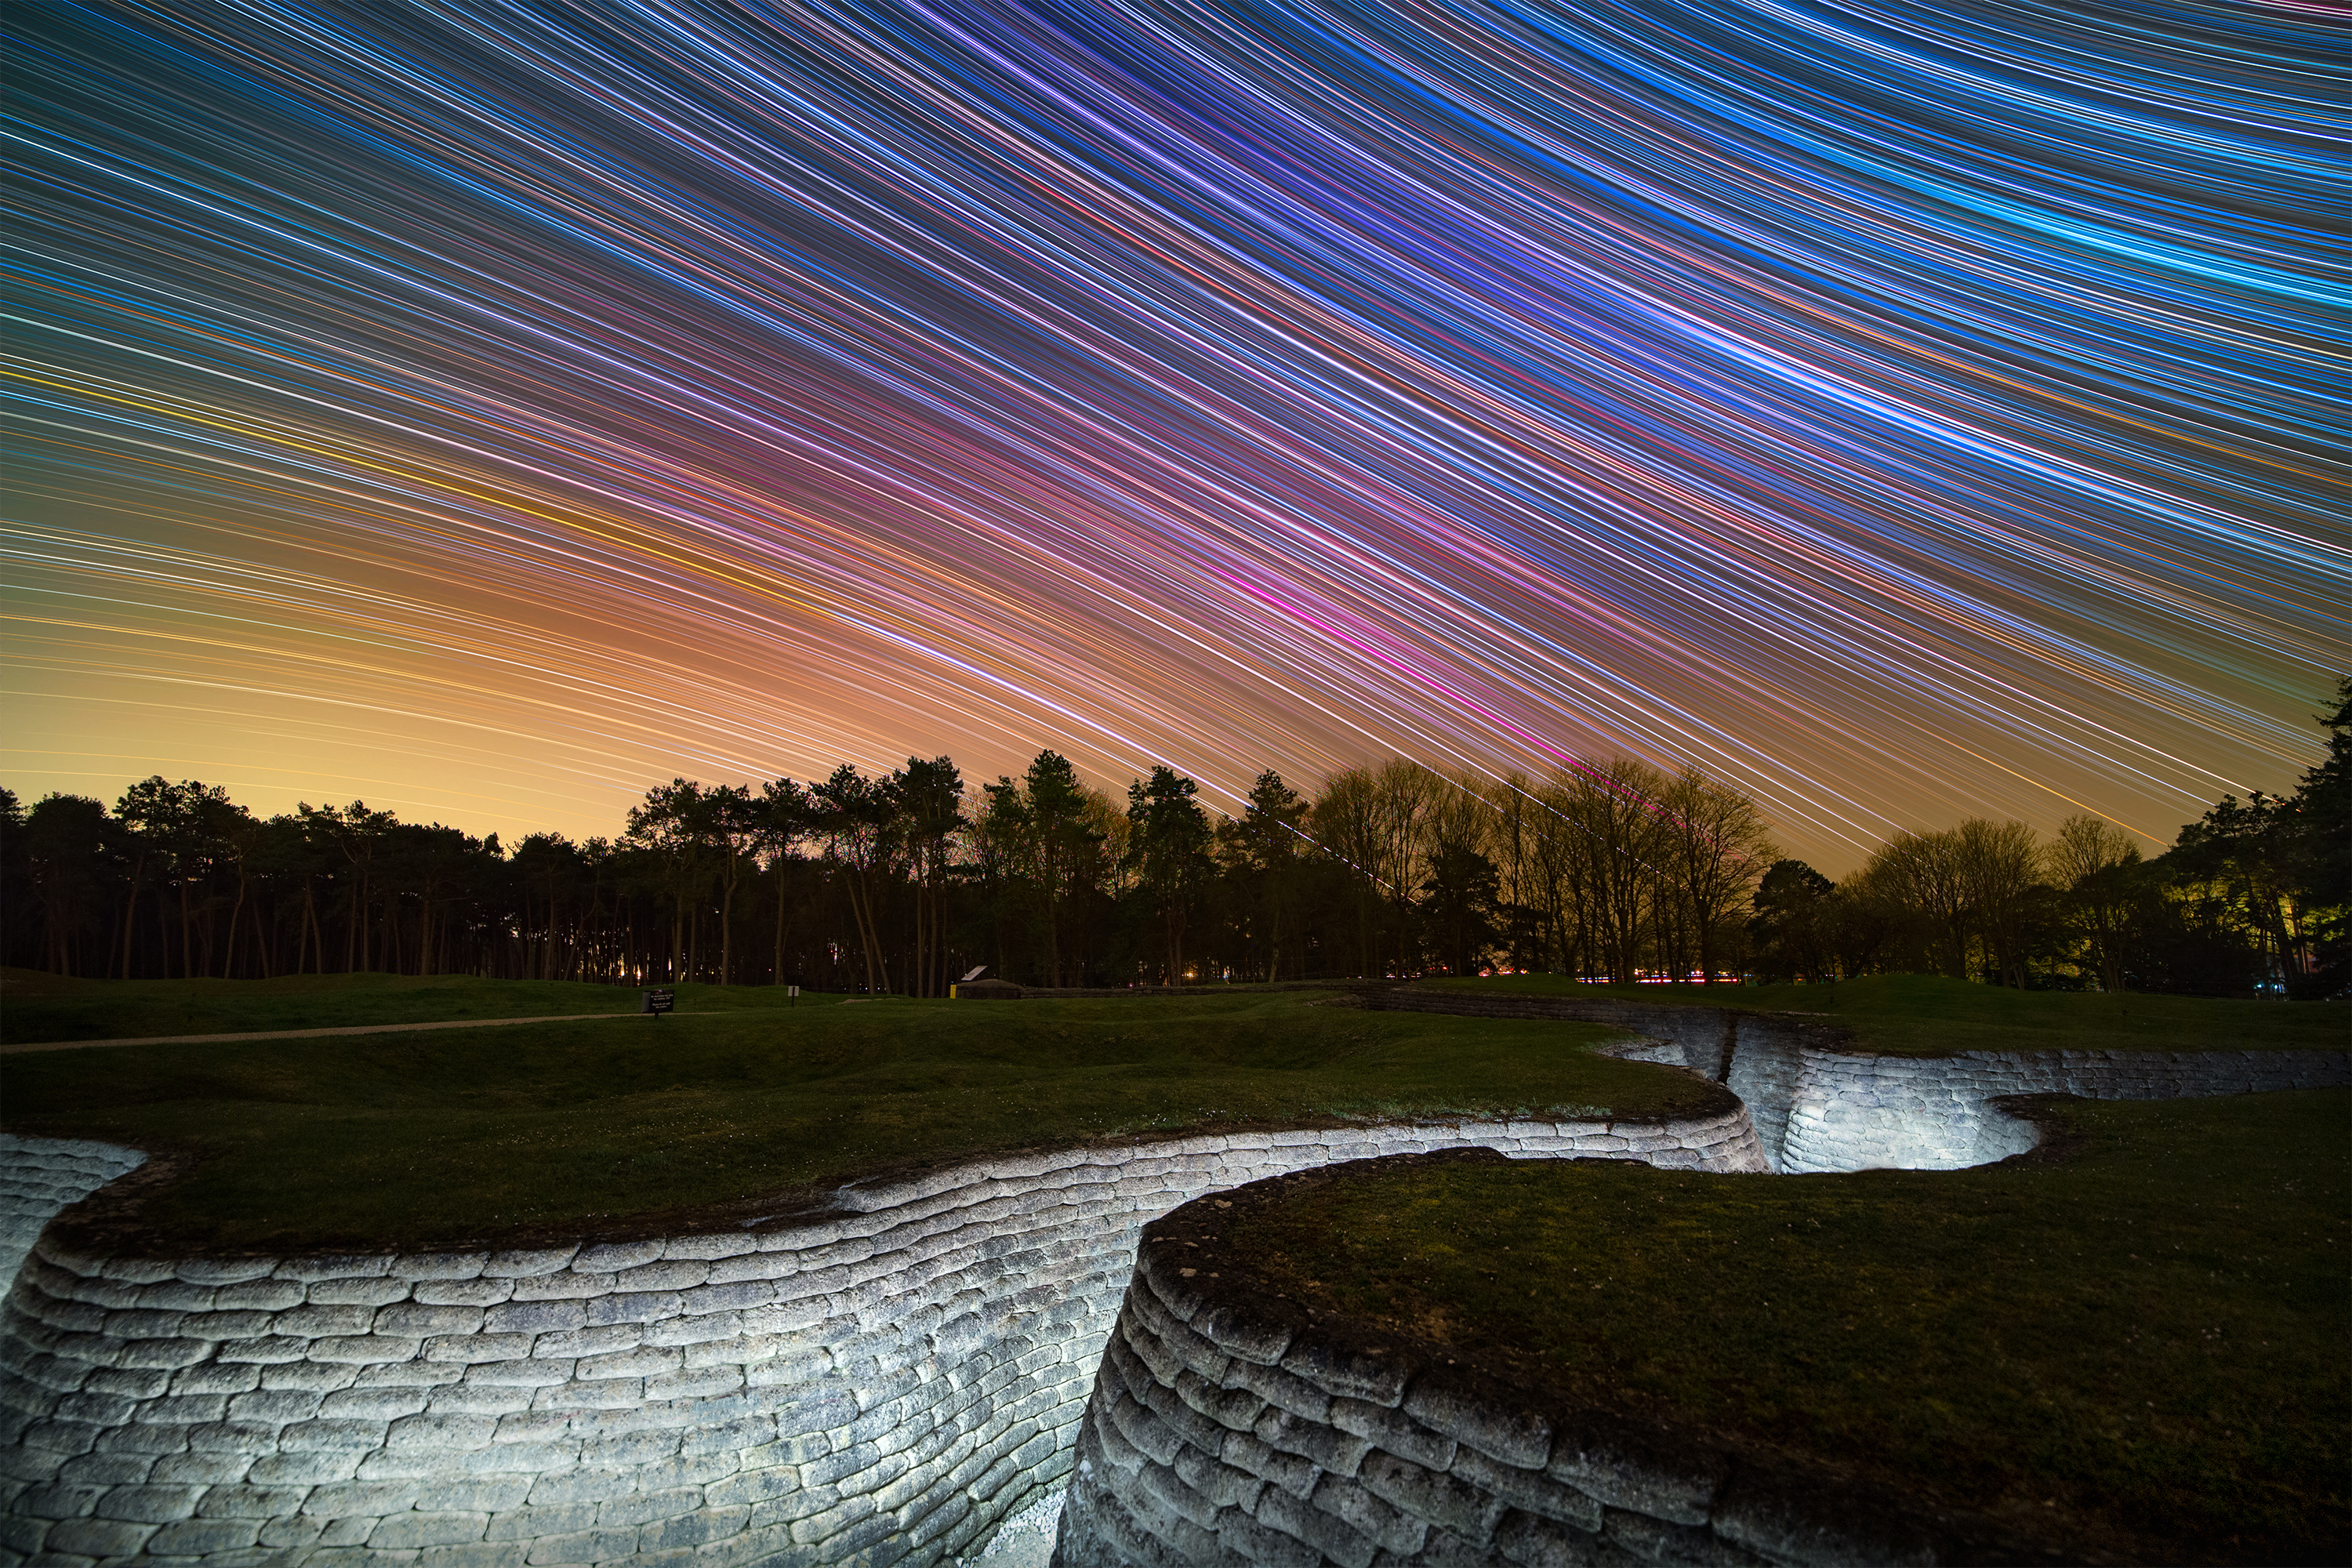 Star trails above the preserved First World War trenches in Canadian National Vimy Memorial Park, Northern France. Taken over five hours, the camera captured the rotation of the sky revealing the colourful stars.  